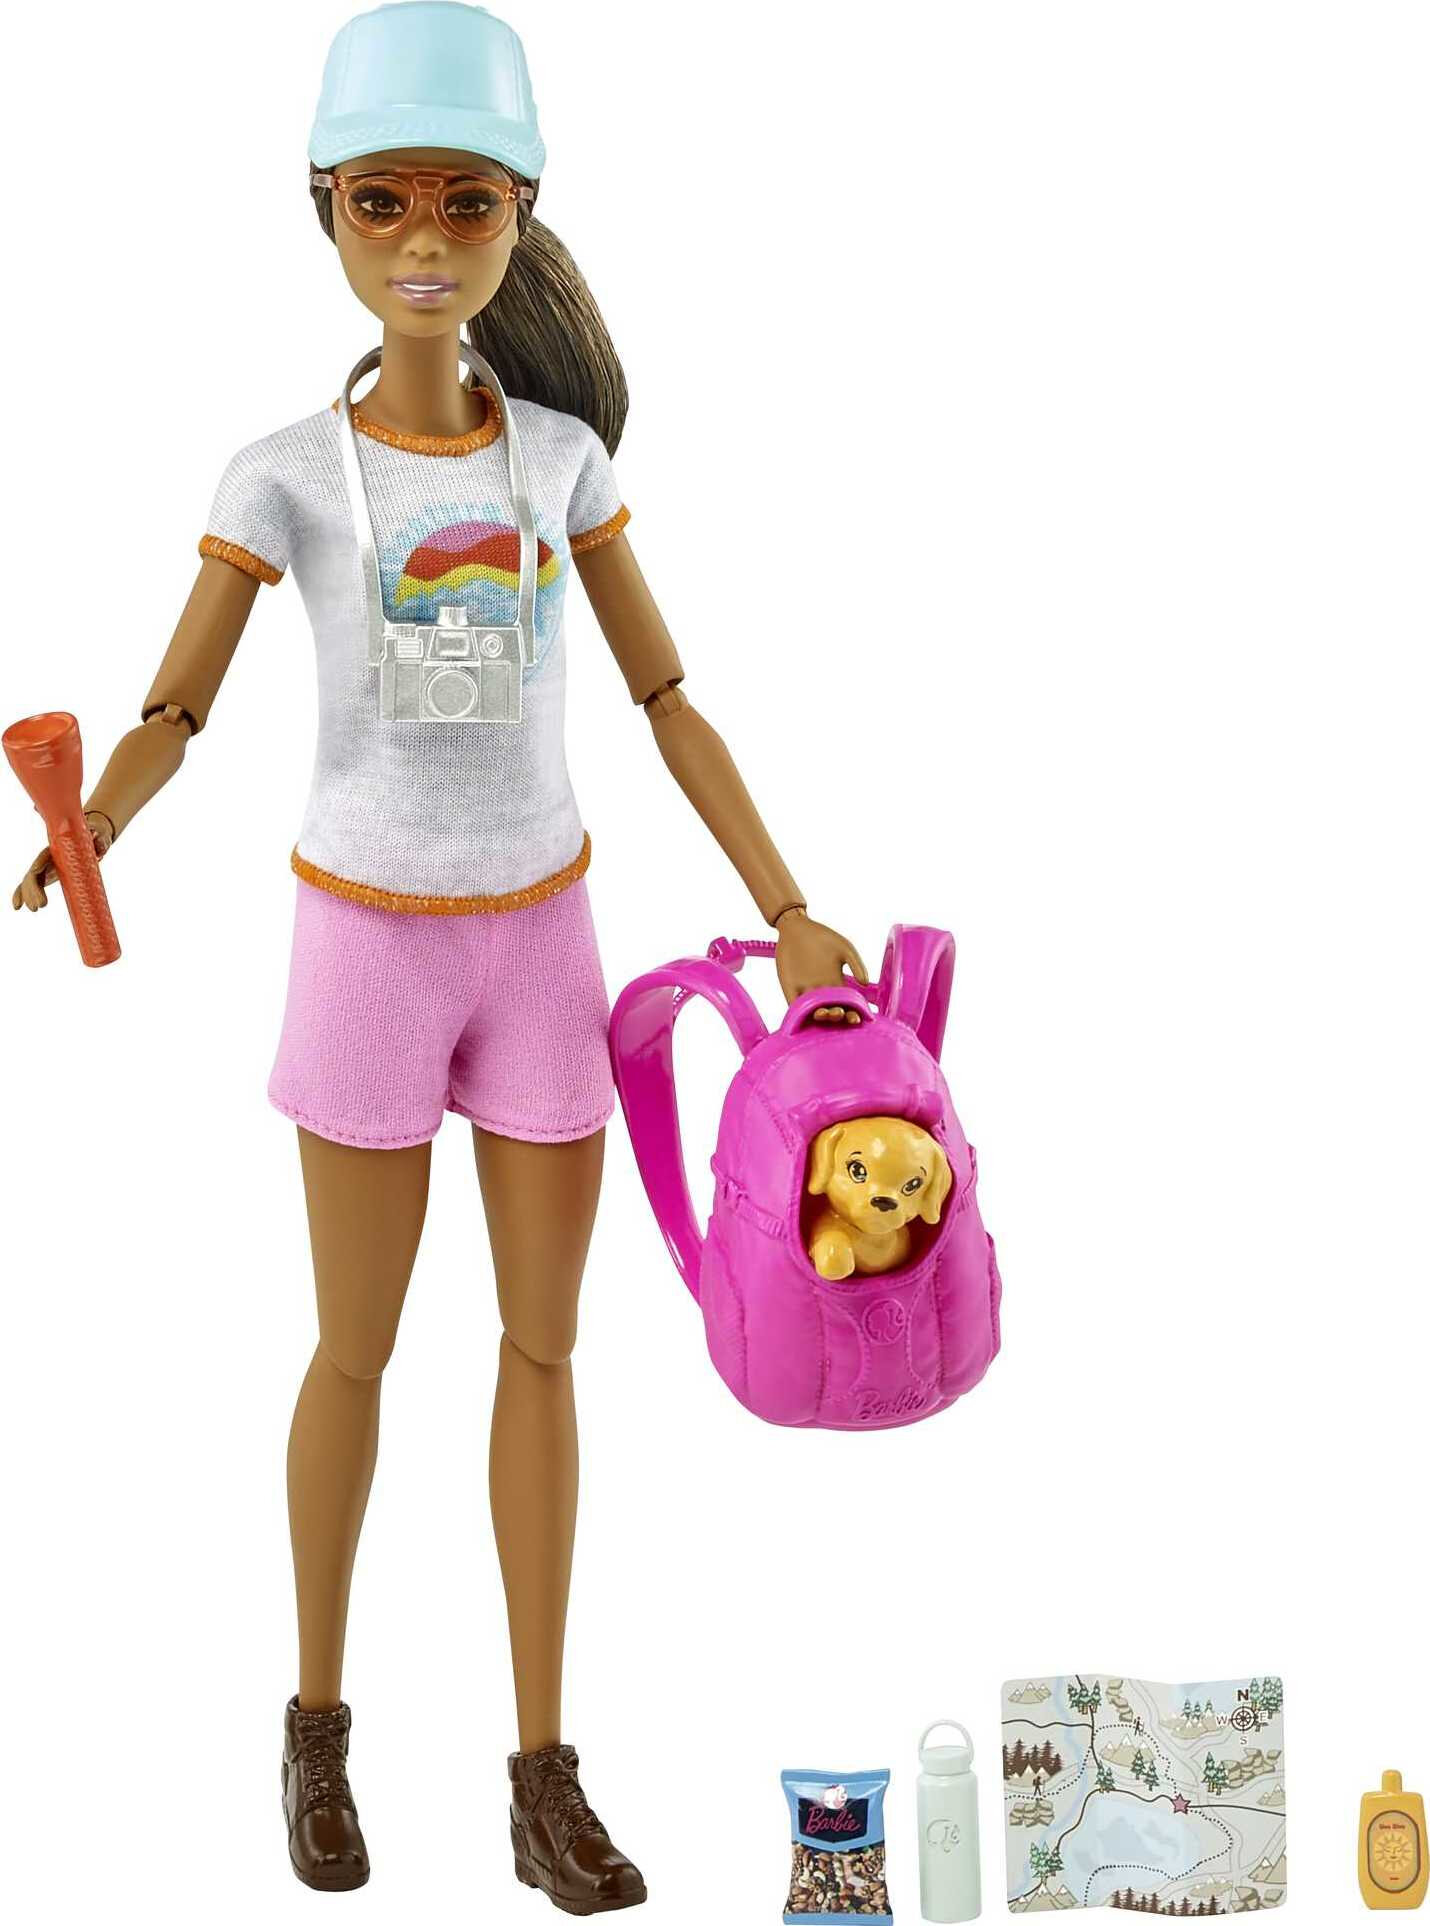 Barbie Hiking Doll with 9 Accessories Including Puppy, Backpack, Map & More, Brunette Doll - image 1 of 5